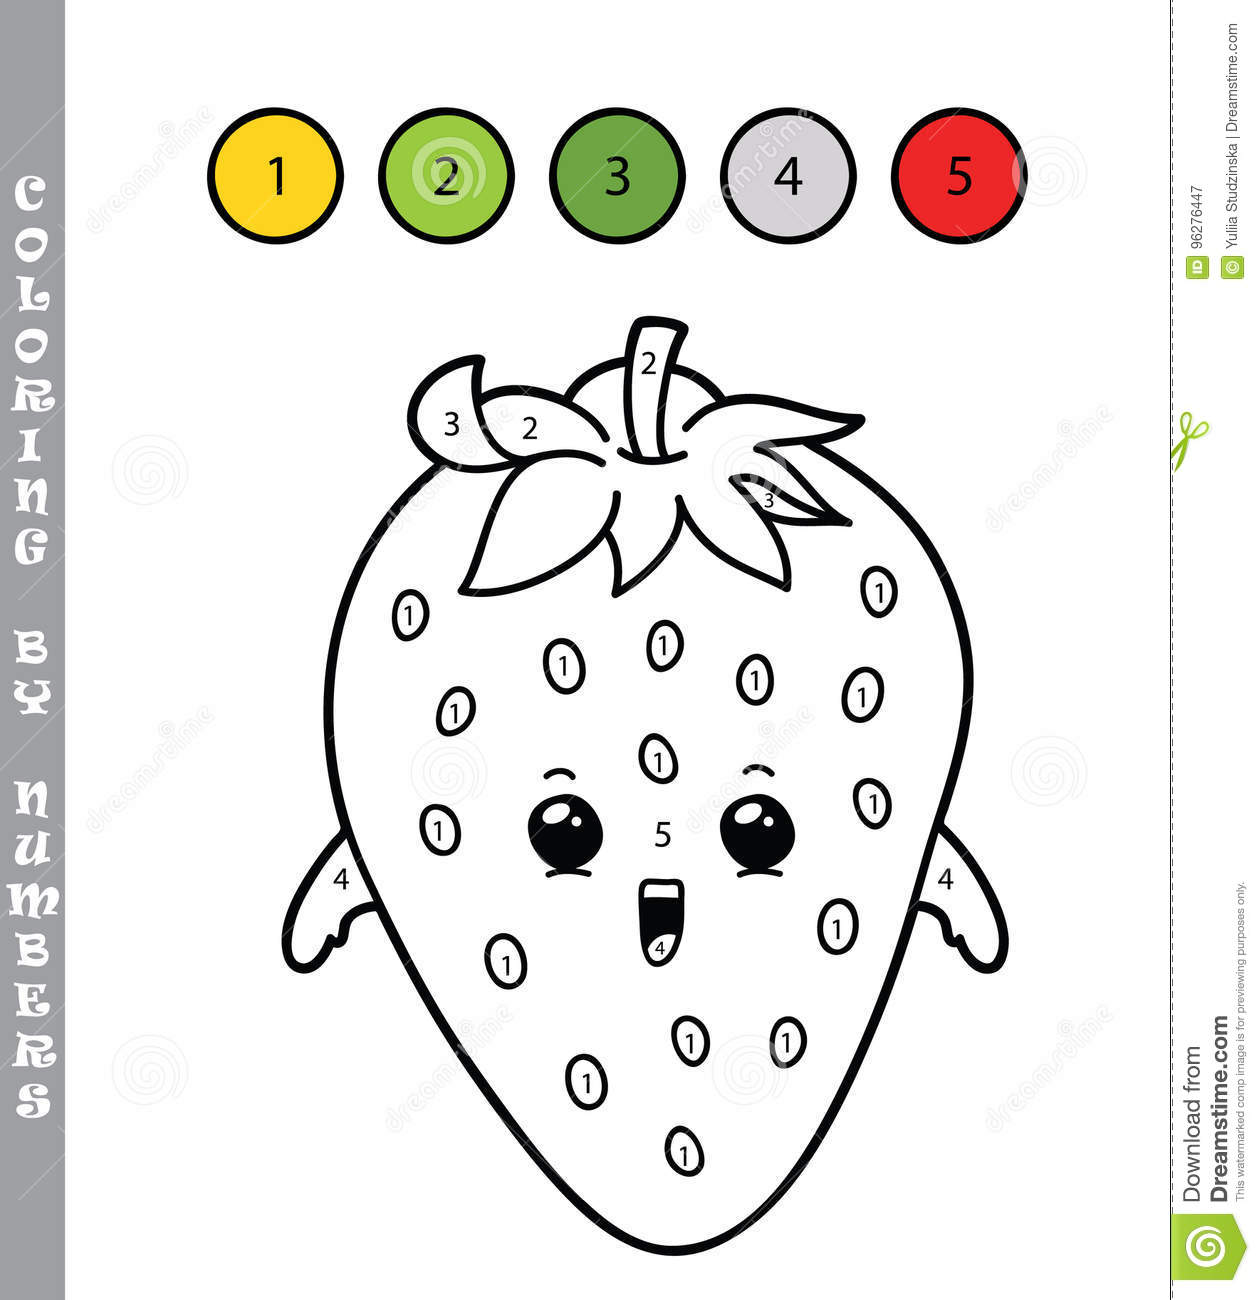 Bright strawberry coloring book with numbers